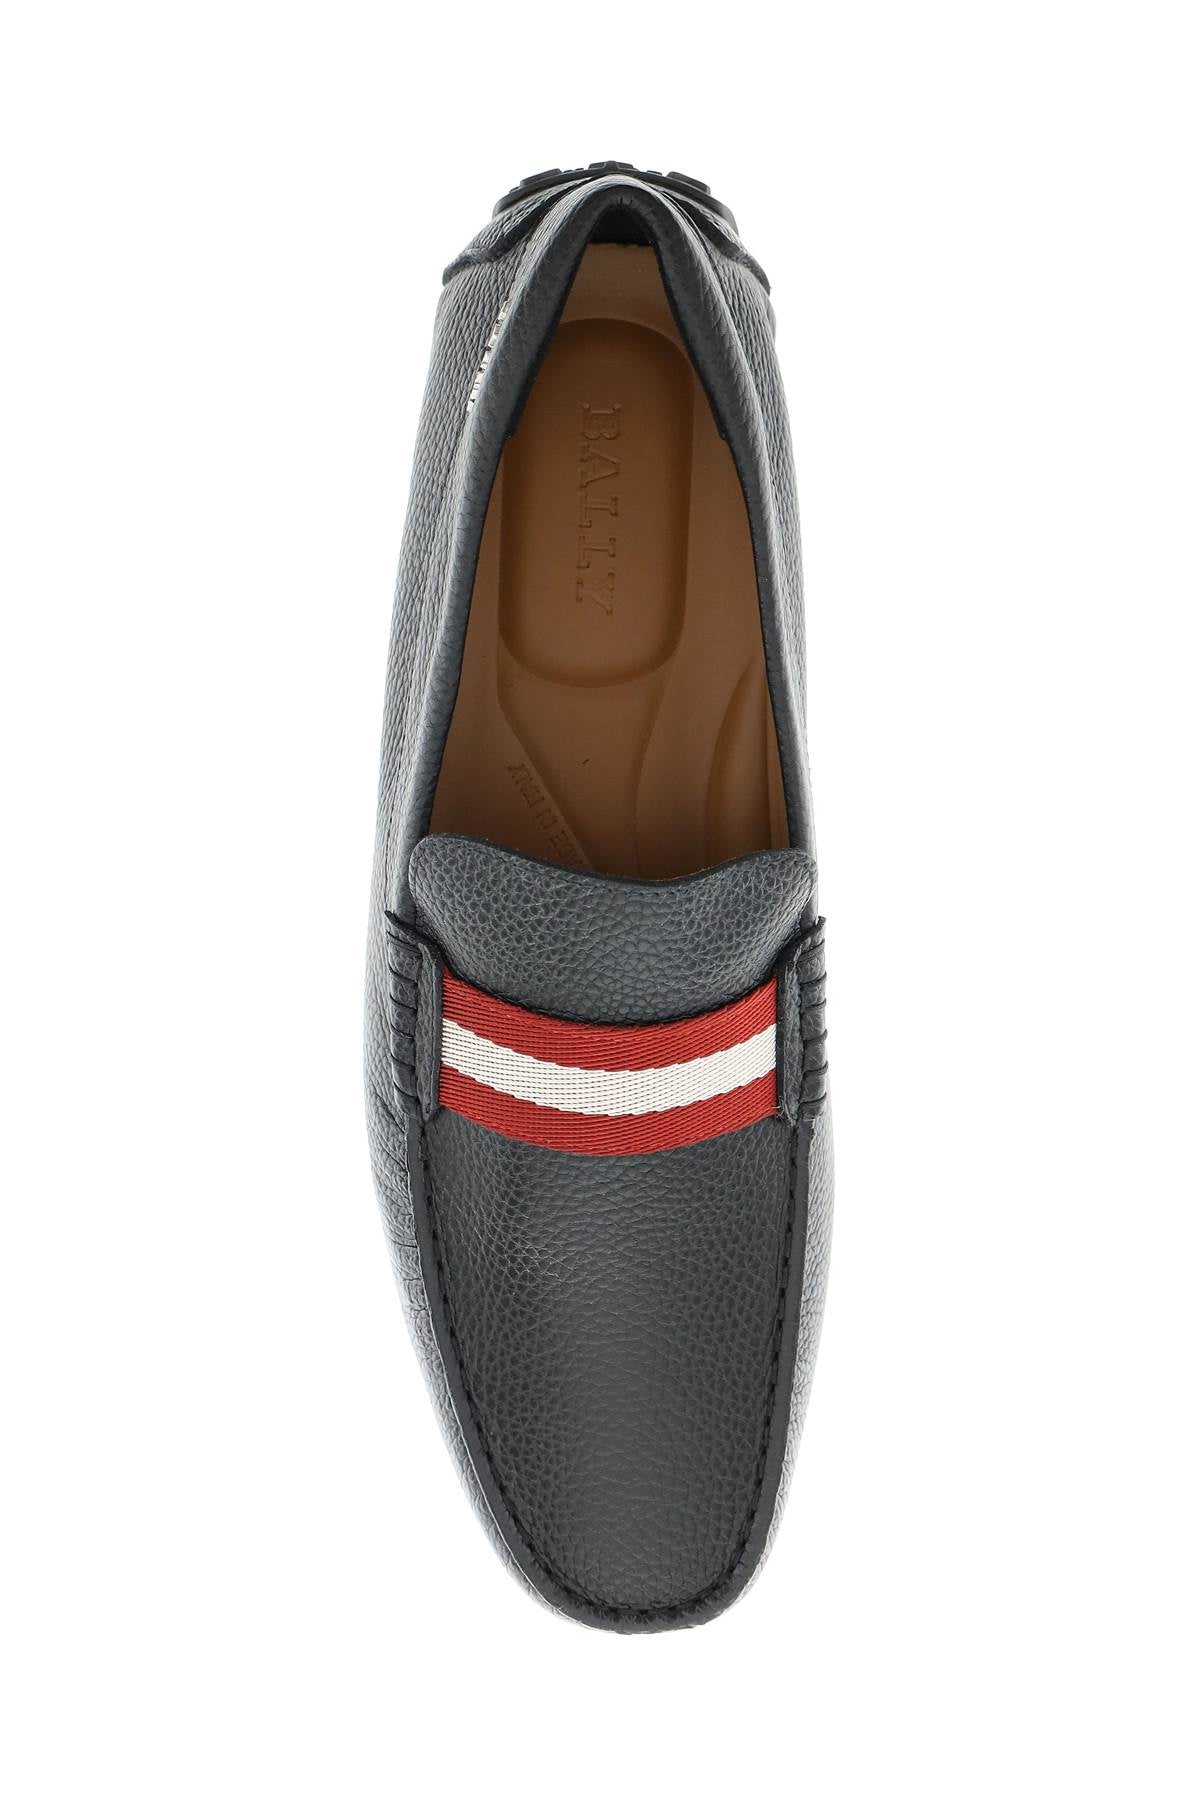 Bally 'pearce' loafers